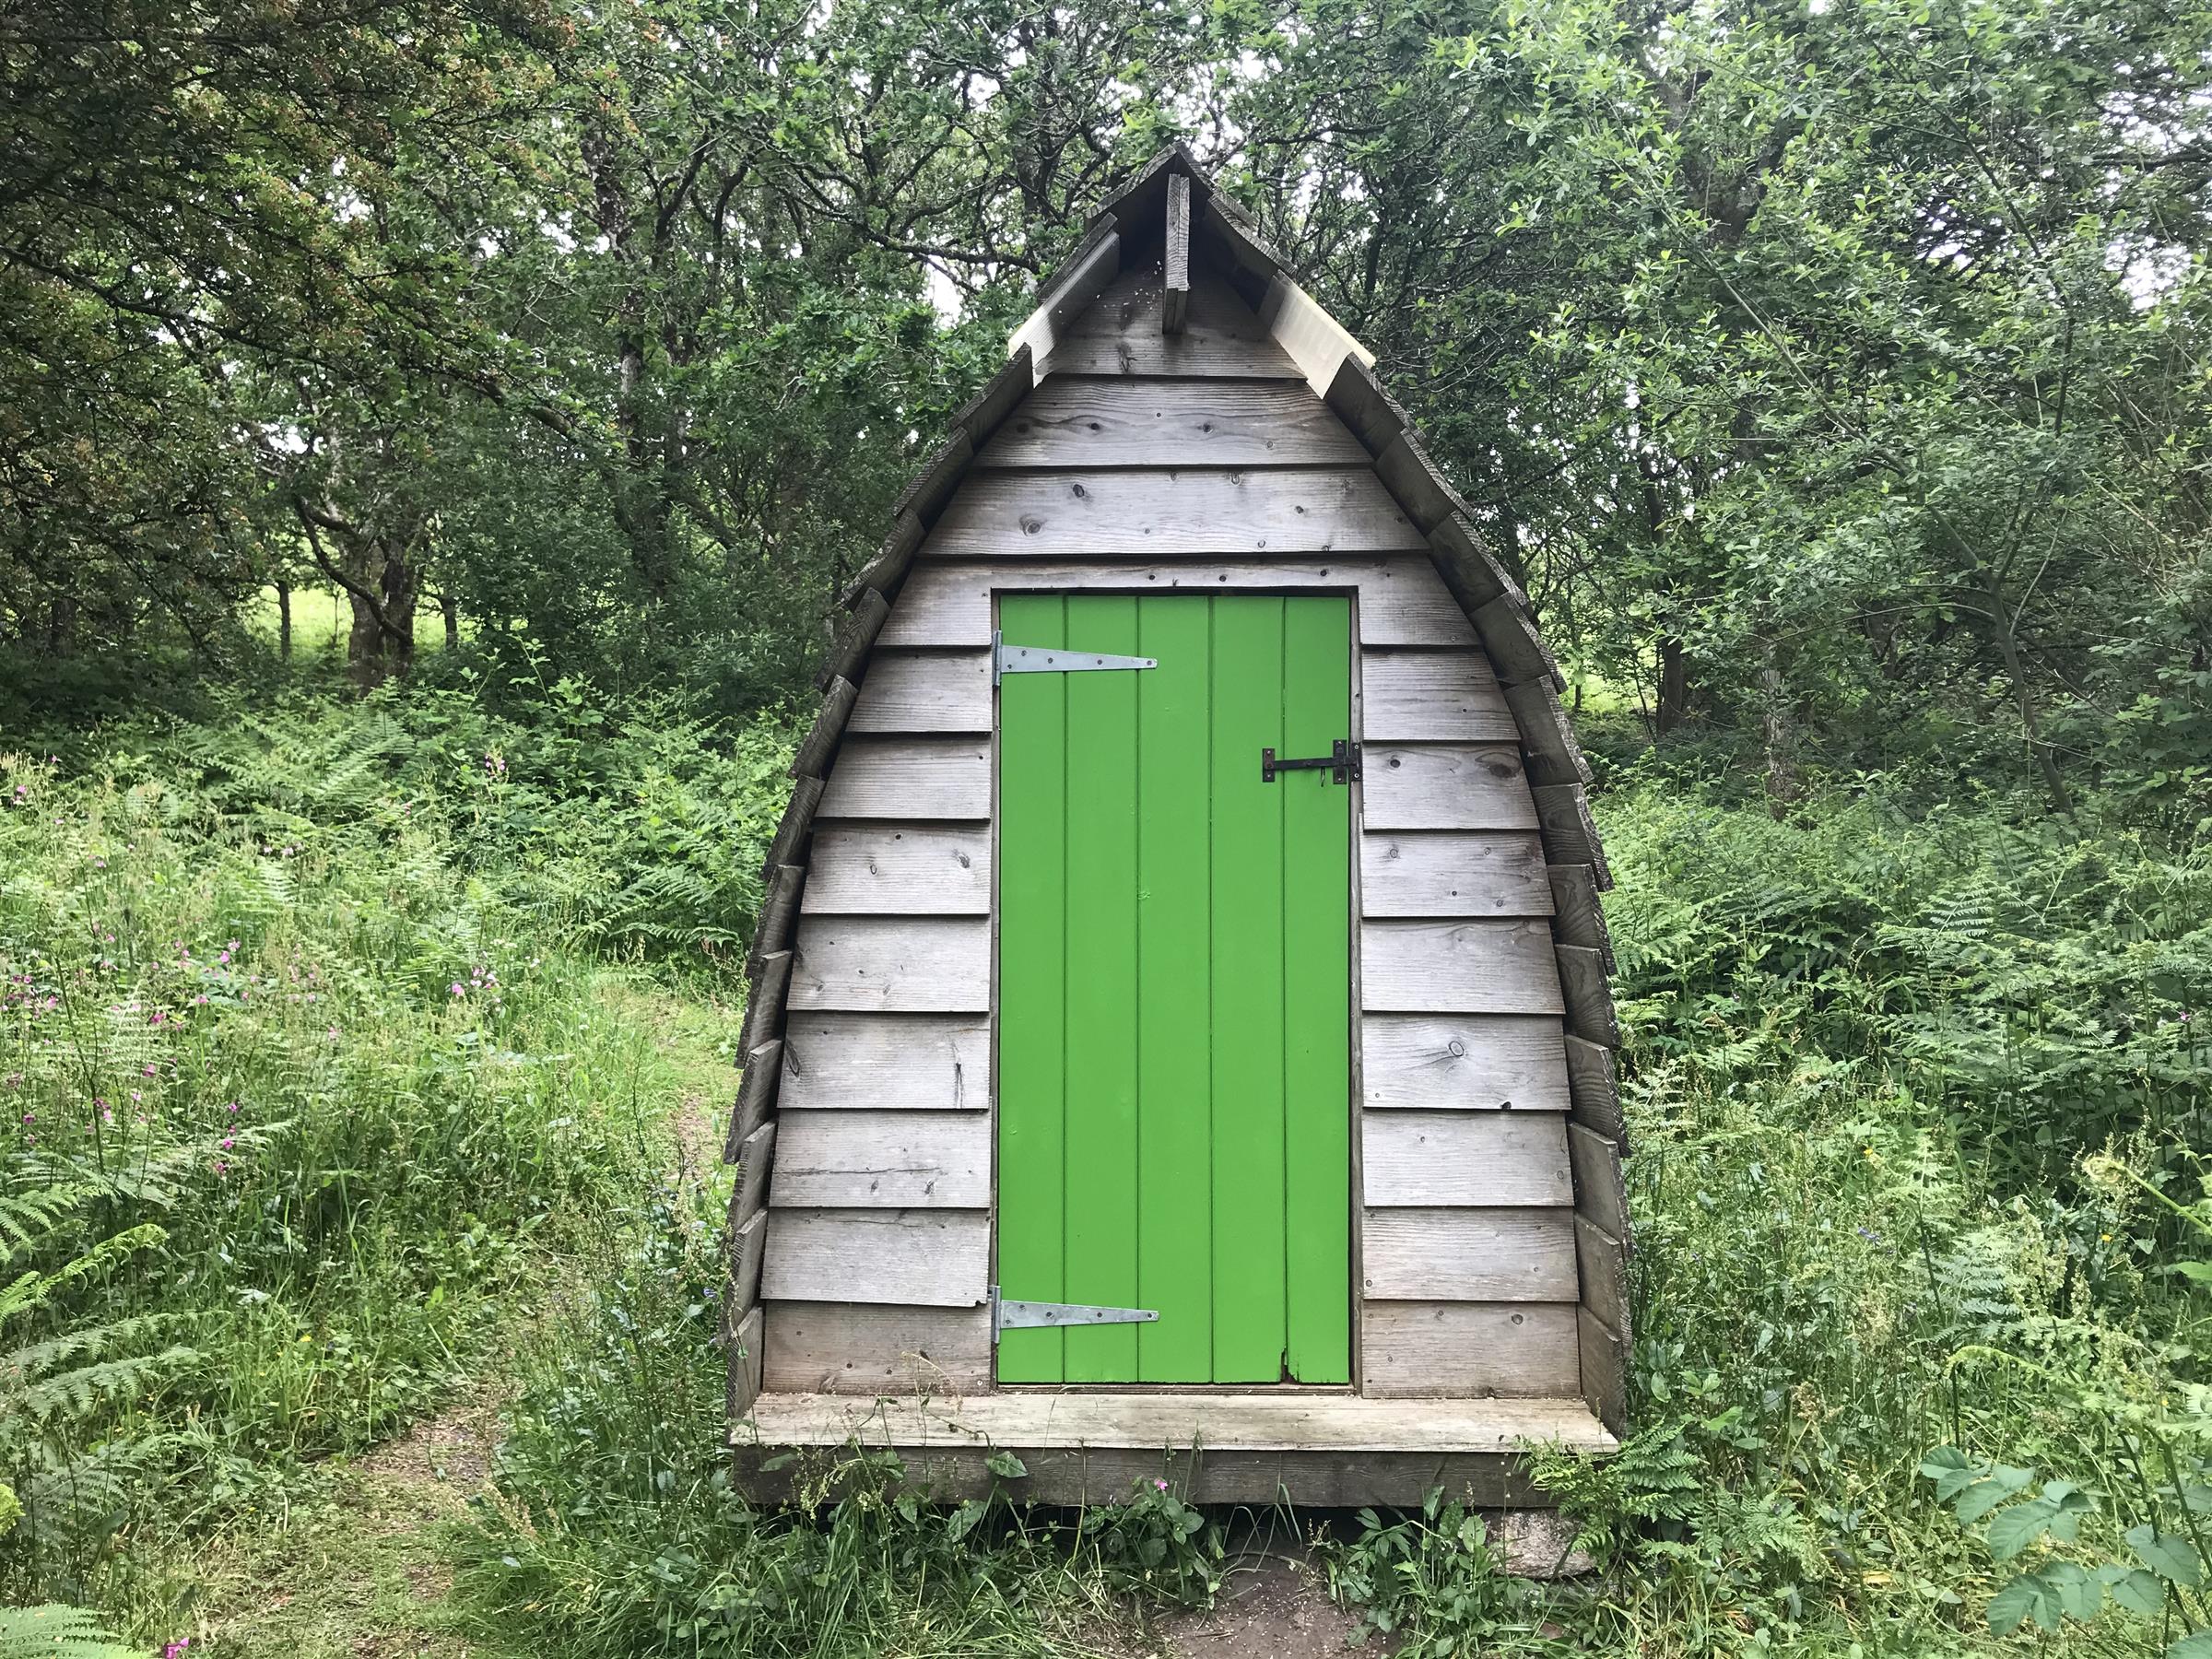 Compost Toilet for the Green Man yurt